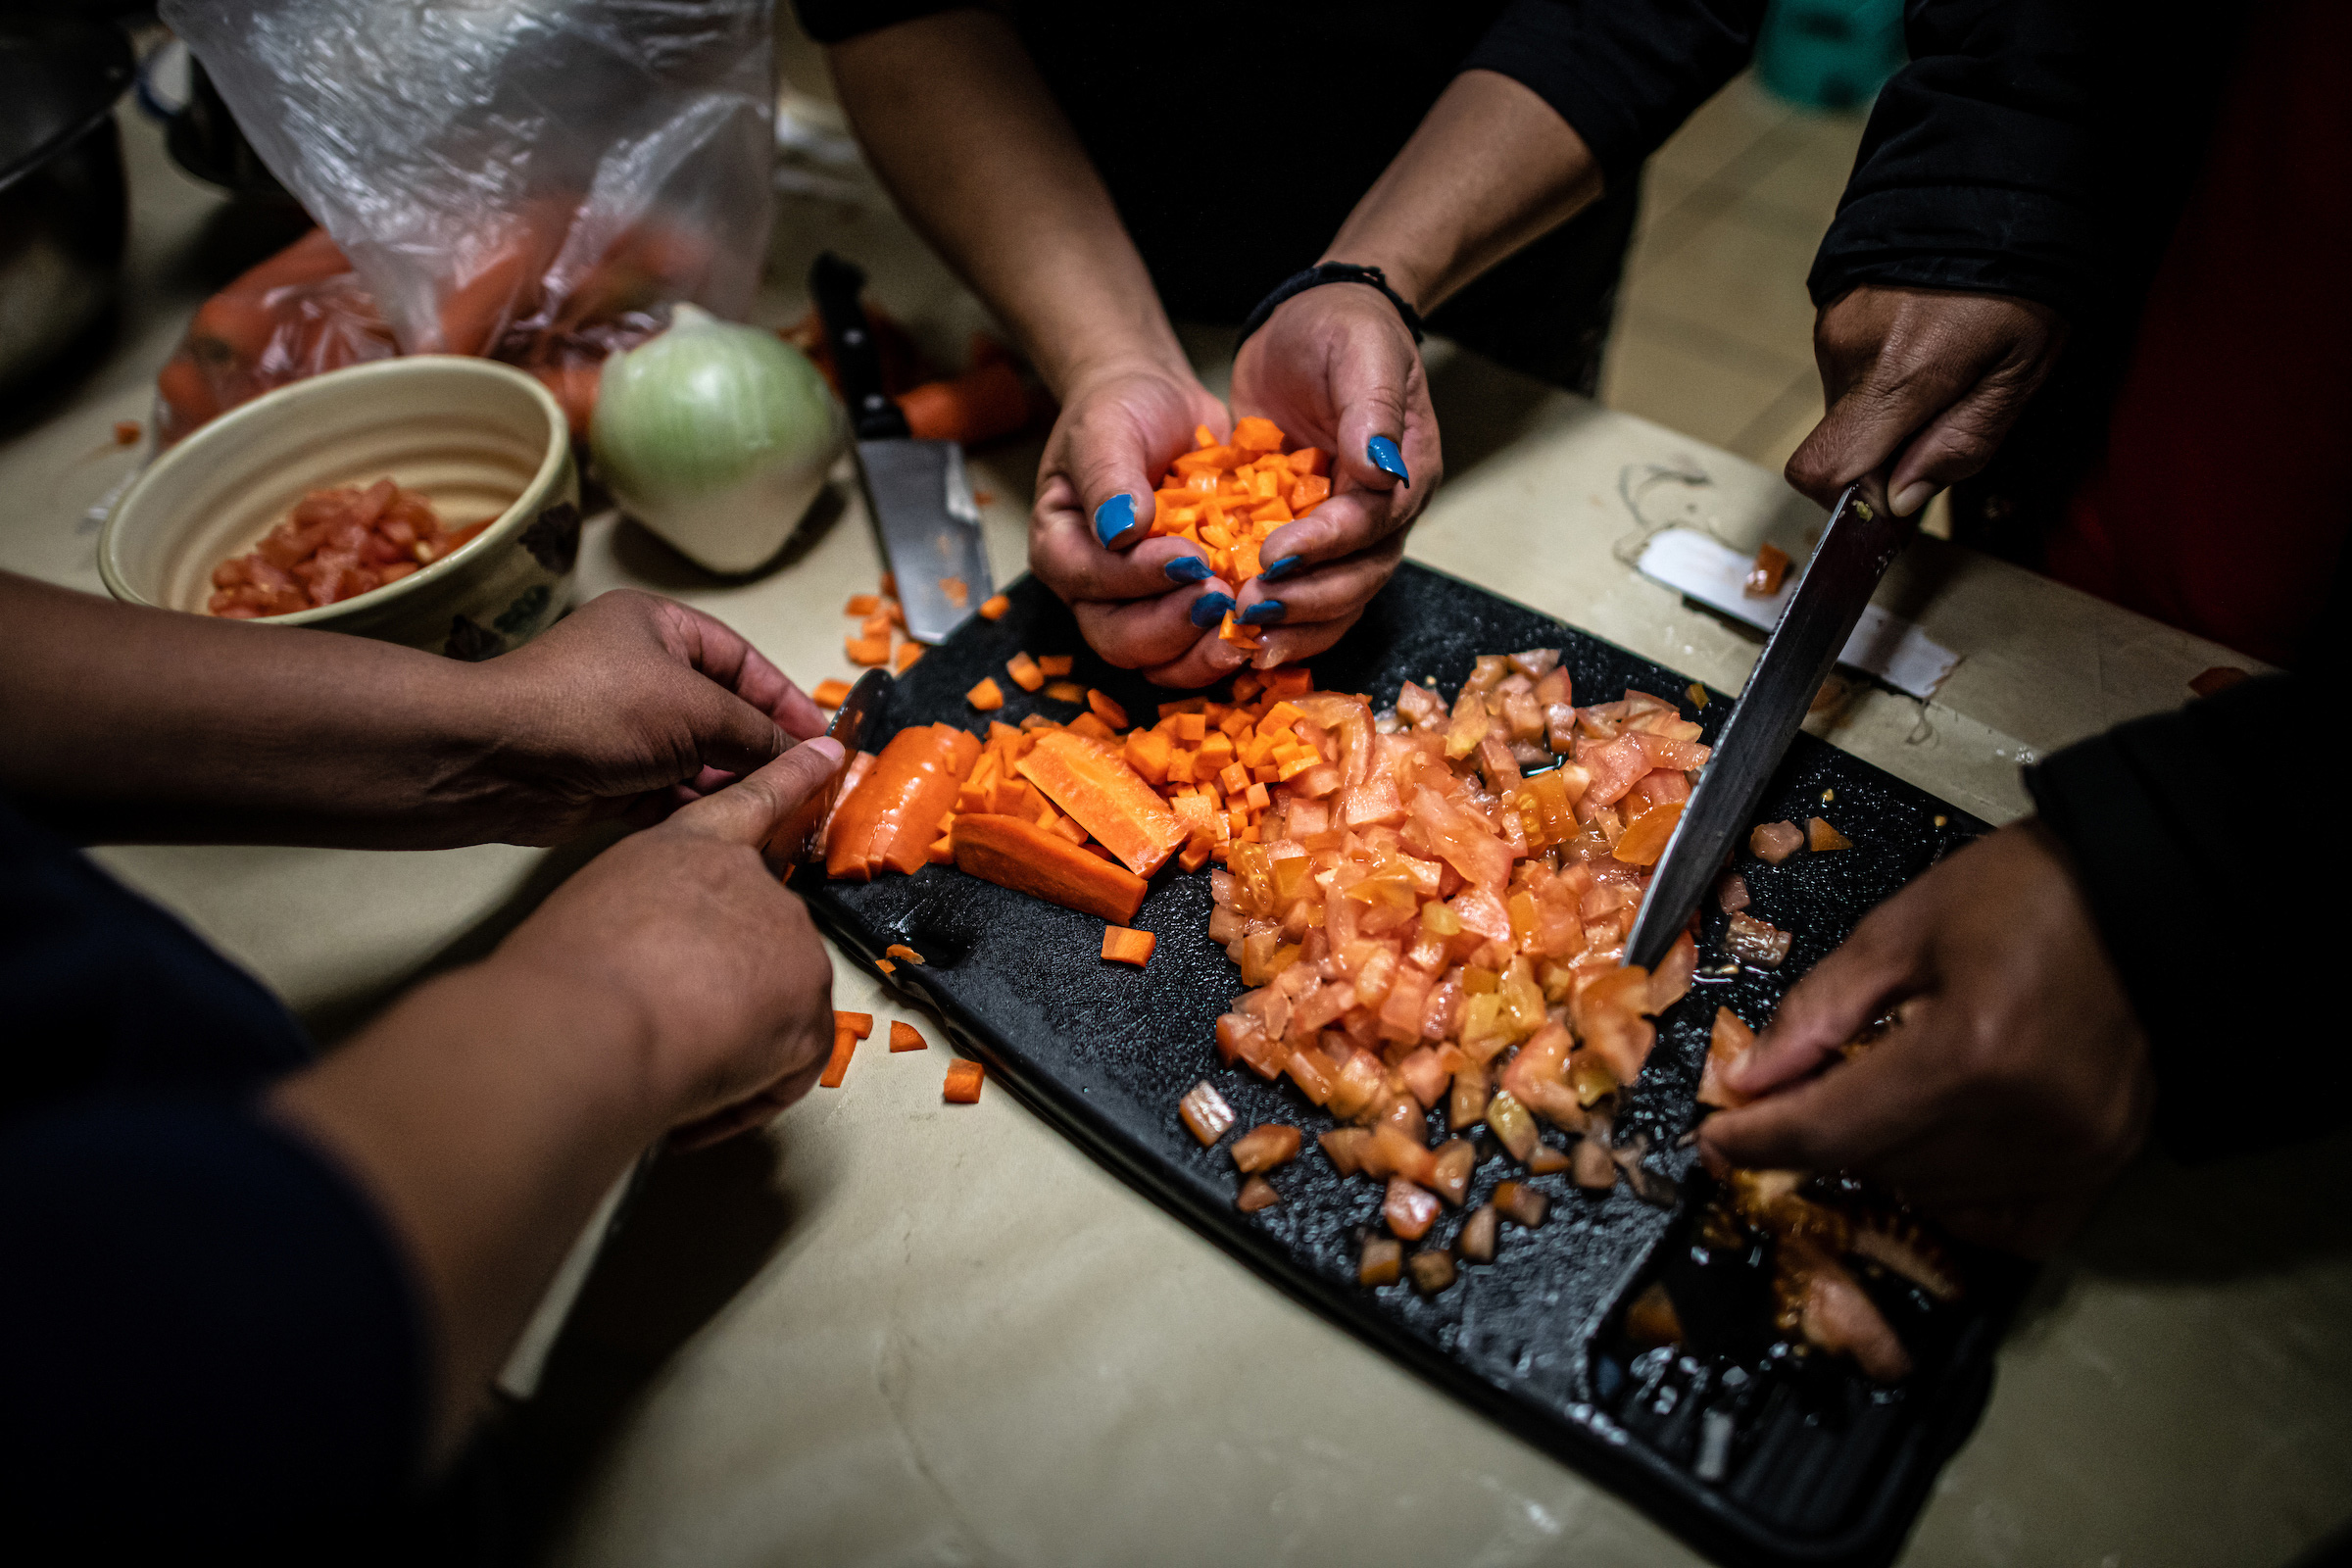 Shelter guests chop carrots while cooking soup together in the kitchen.